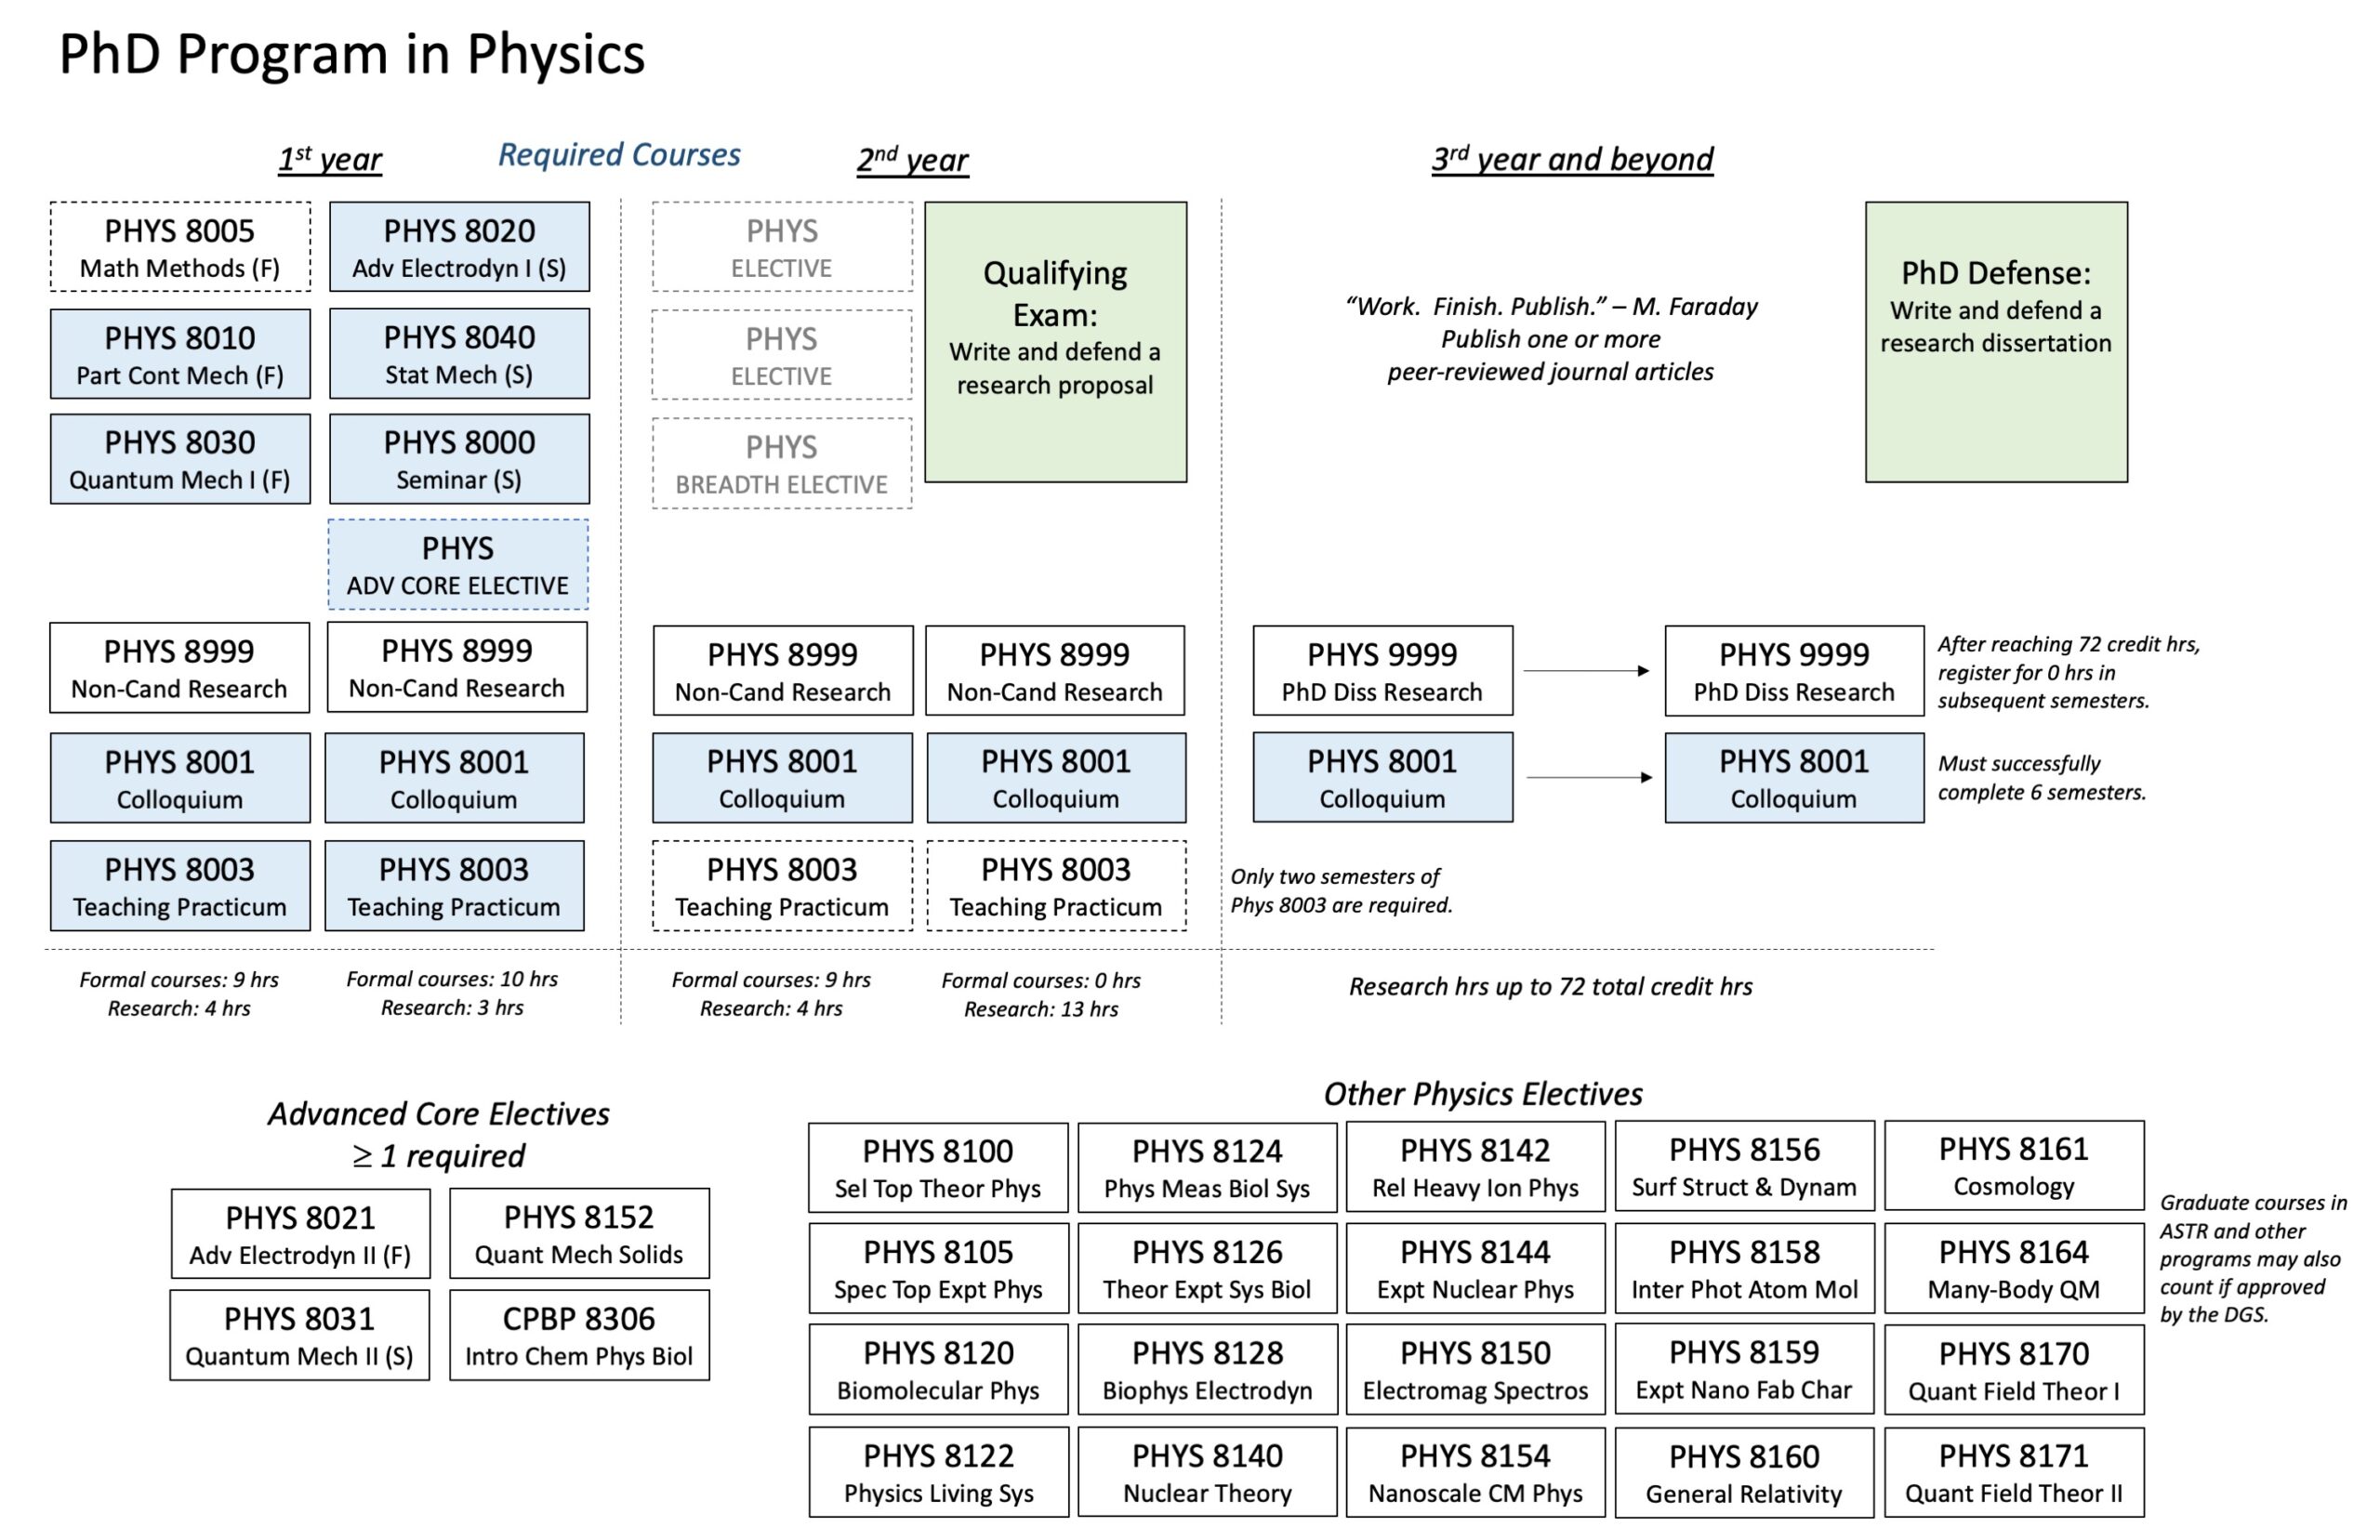 yale physics phd requirements